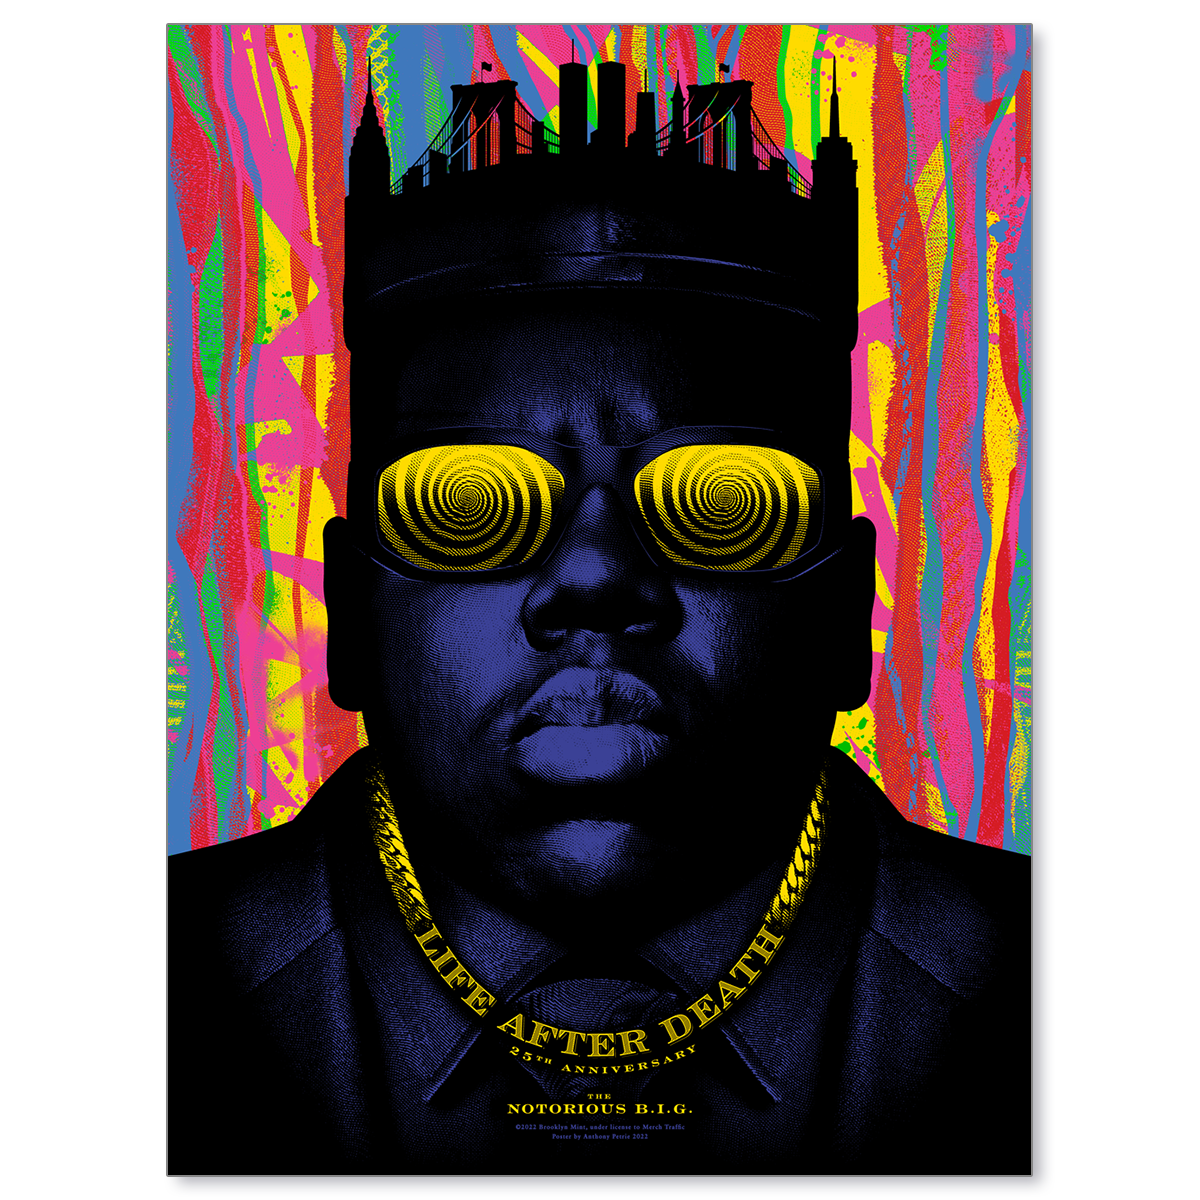 The Notorious B.I.G. Life After Death 25th Anniversary (Main Edition)